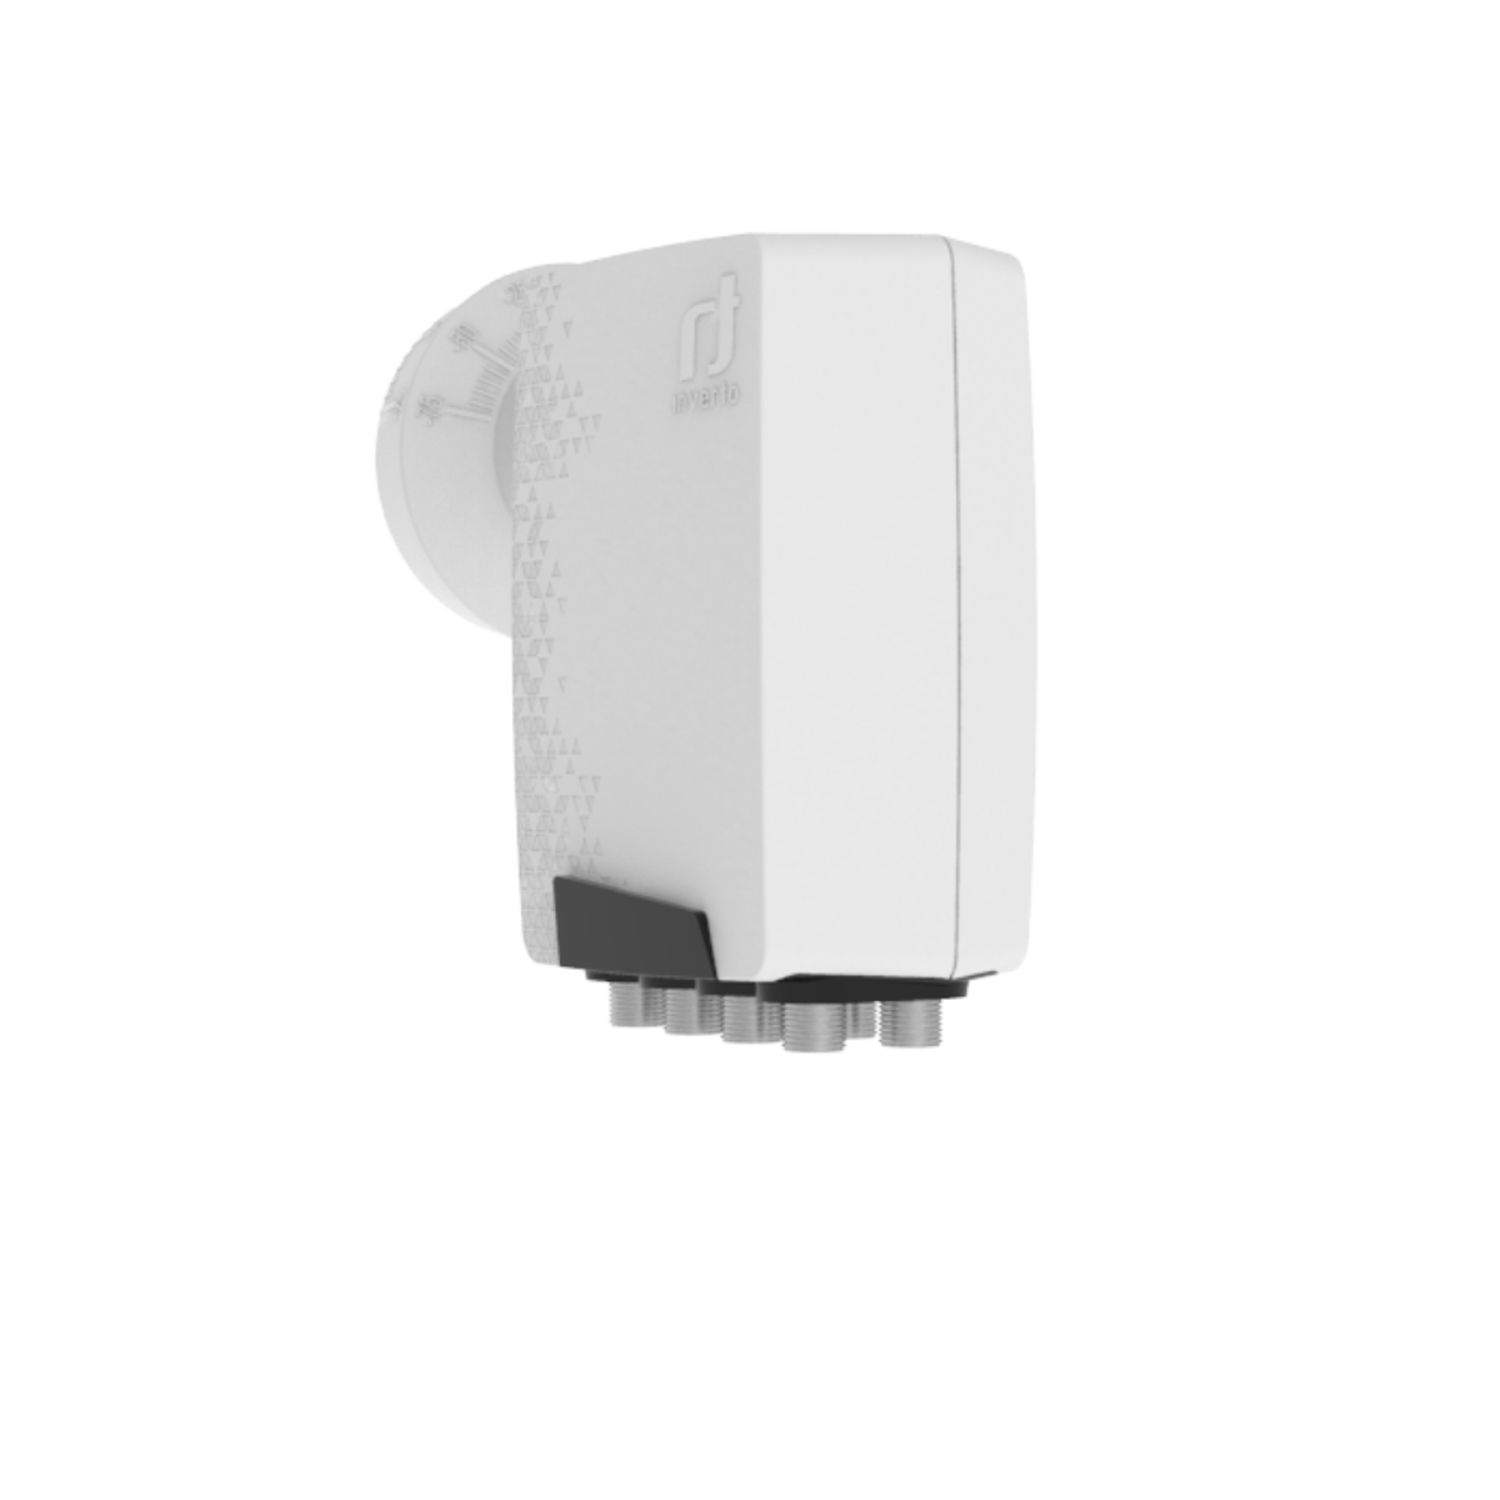 Output Home 40mm Pro INVERTO Octo PLL Universal LNB